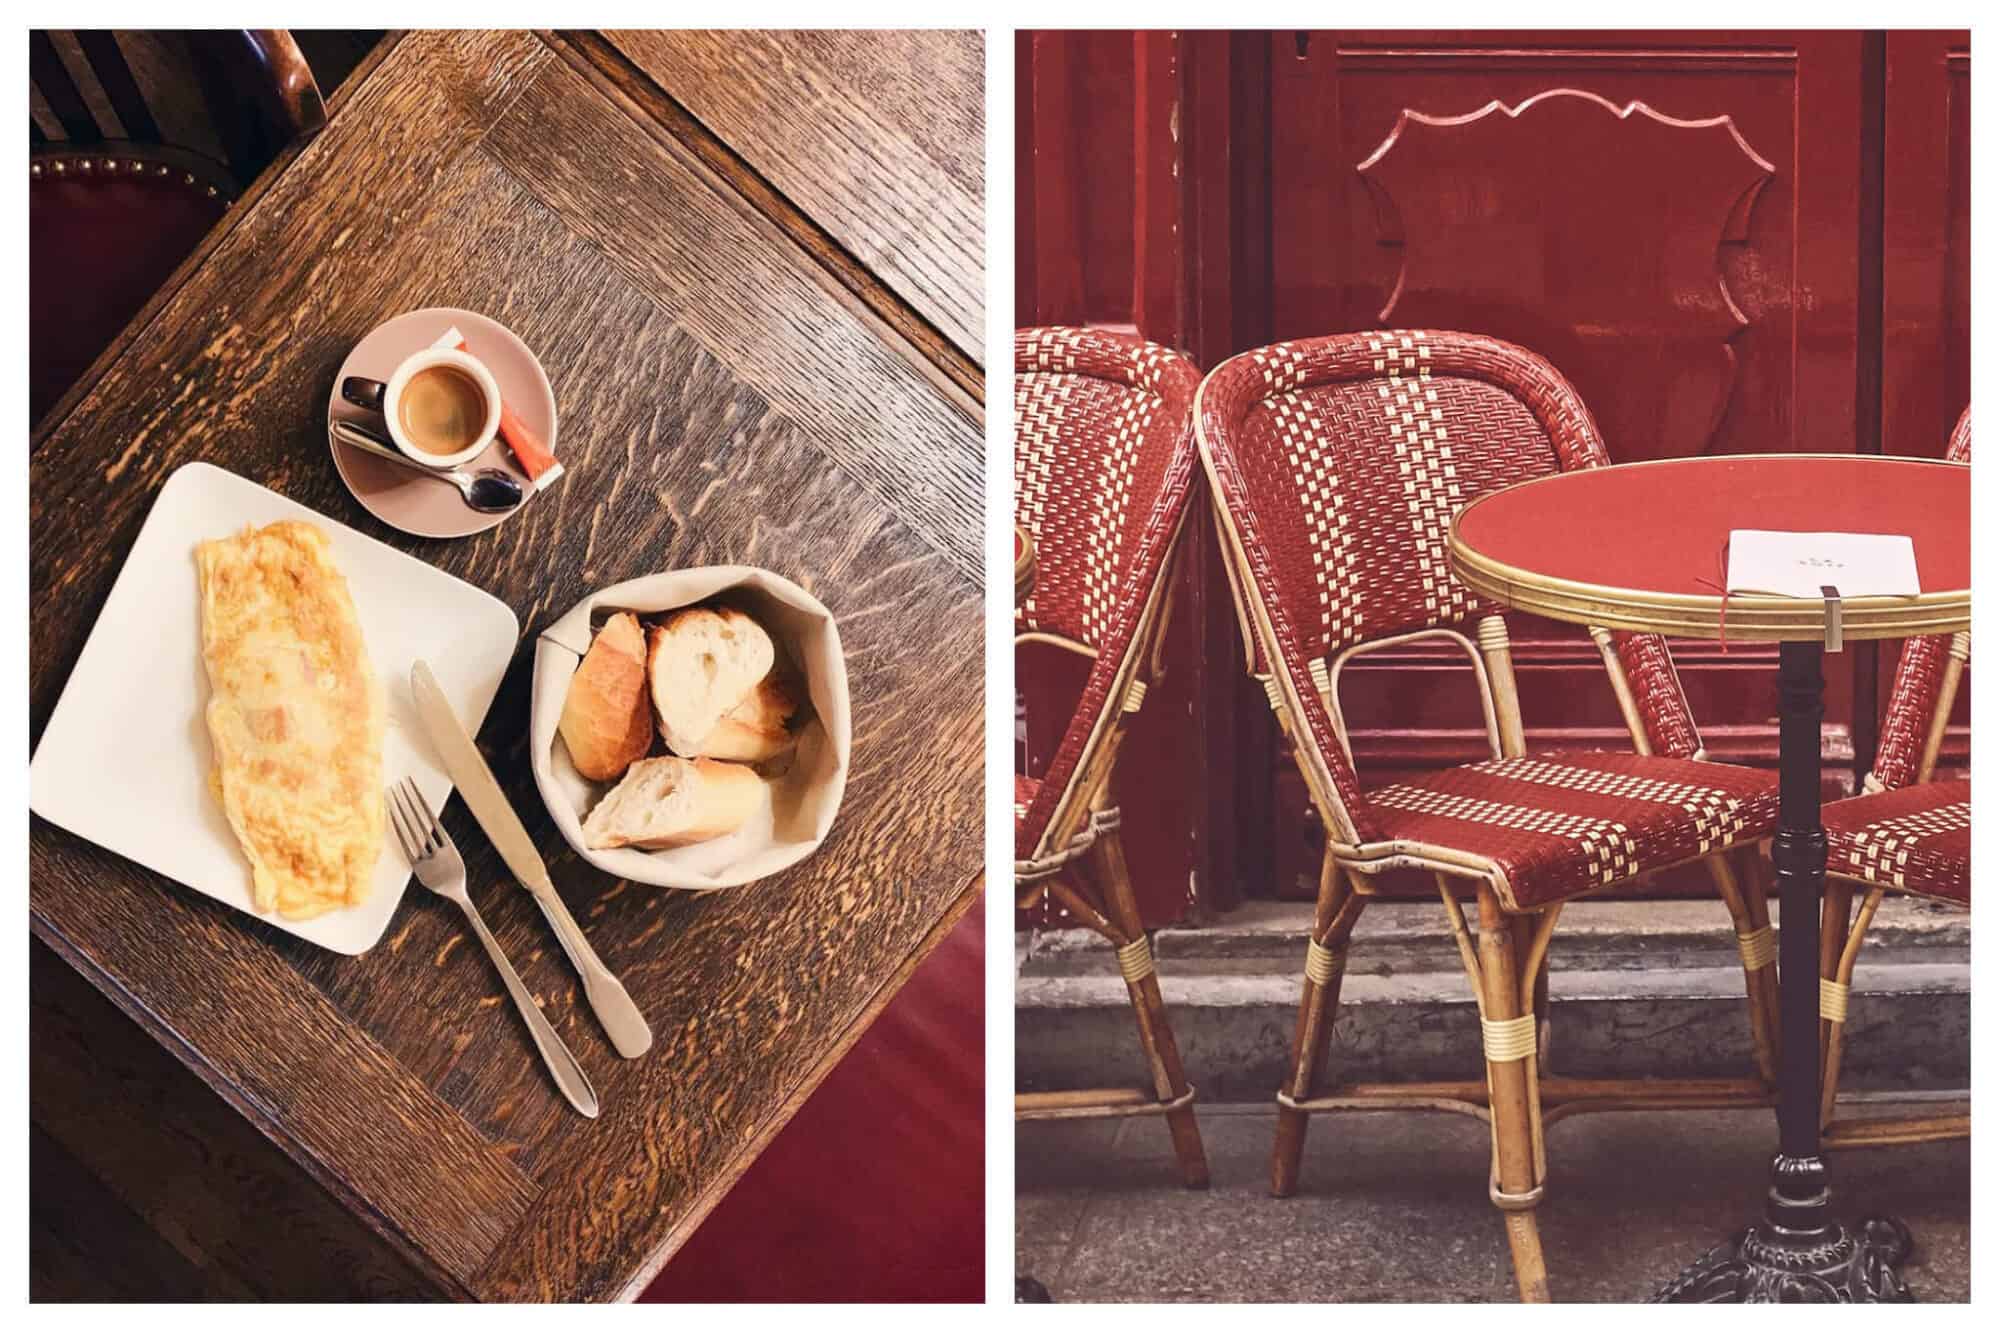 Left: An omelette, espresso and basket of bread sit atop a wooden table at Au Petite Suisse restaurant in Paris, Right: A red table and chairs sit in front of a red wall on a Parisian terrasse 